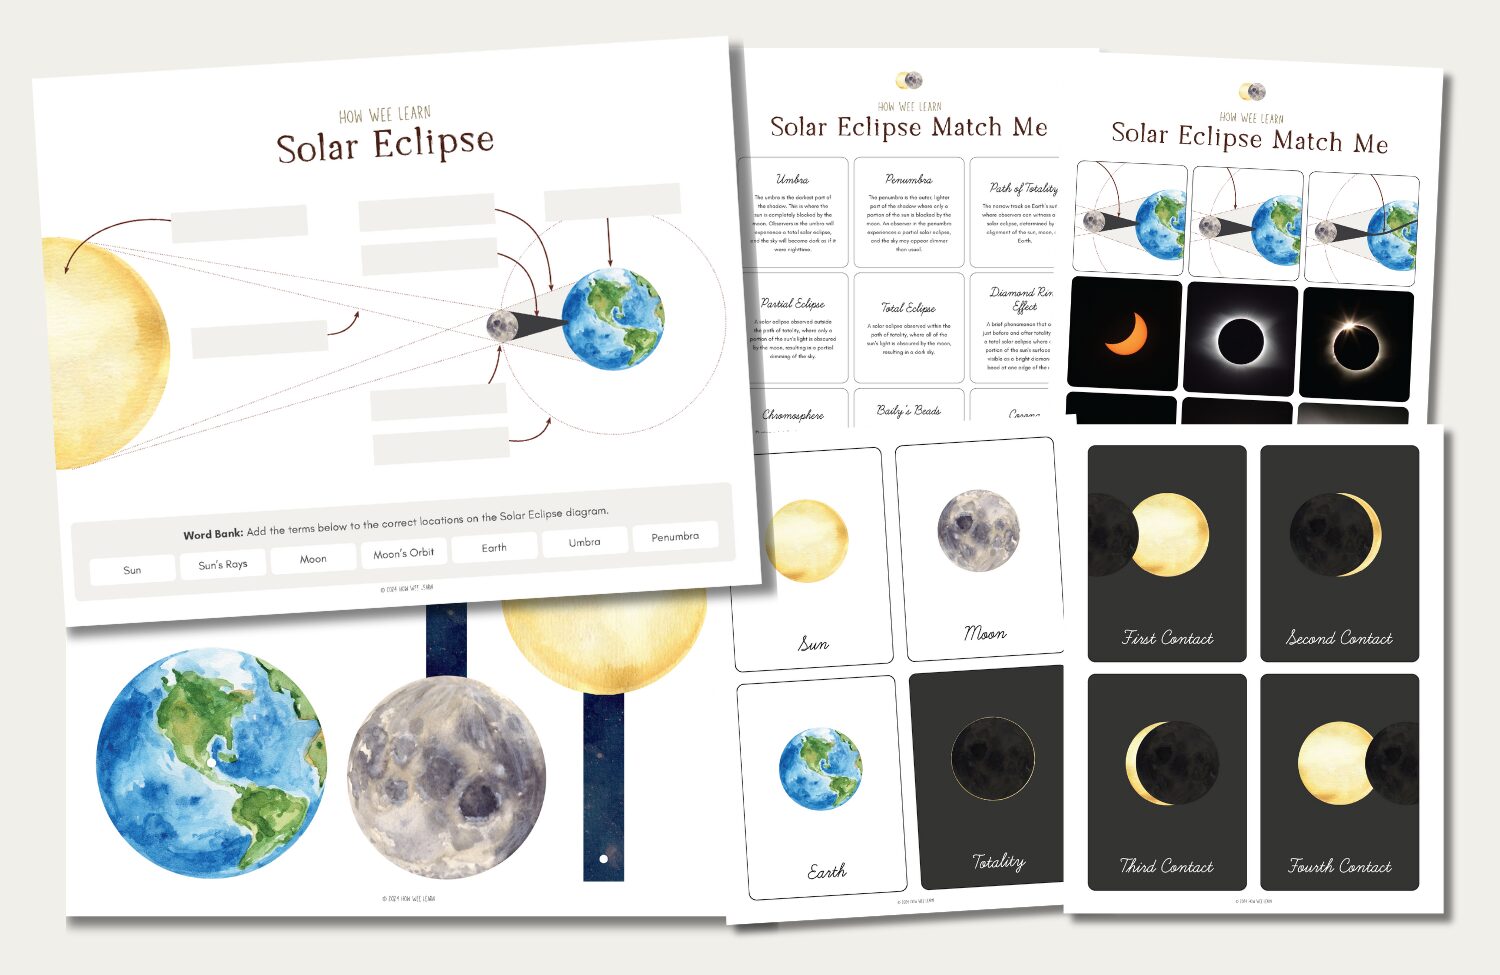 Solar Eclipse Activity Bundle for 2-12 Year Olds, Free Printable